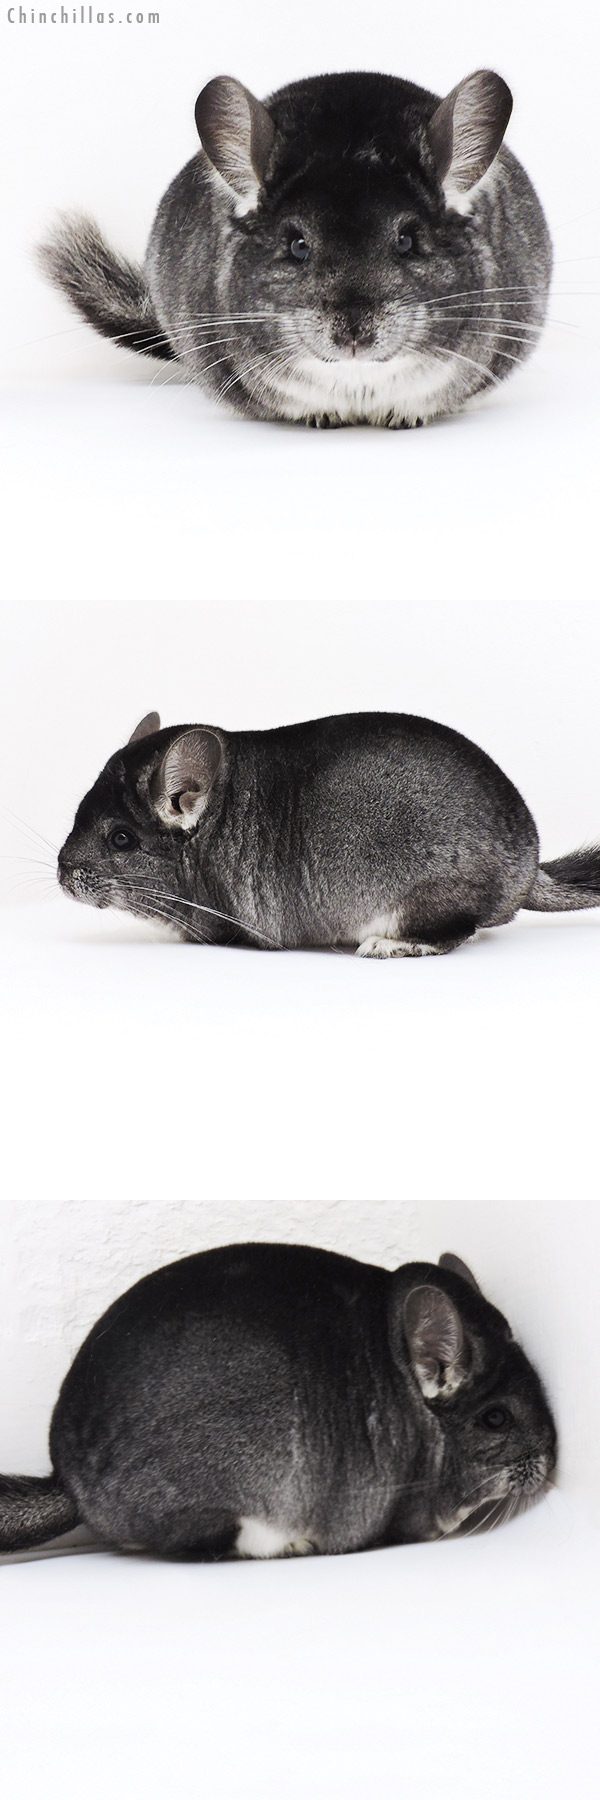 Chinchilla or related item offered for sale or export on Chinchillas.com - 19203 Large Blocky Premium Production Quality Standard Female Chinchilla